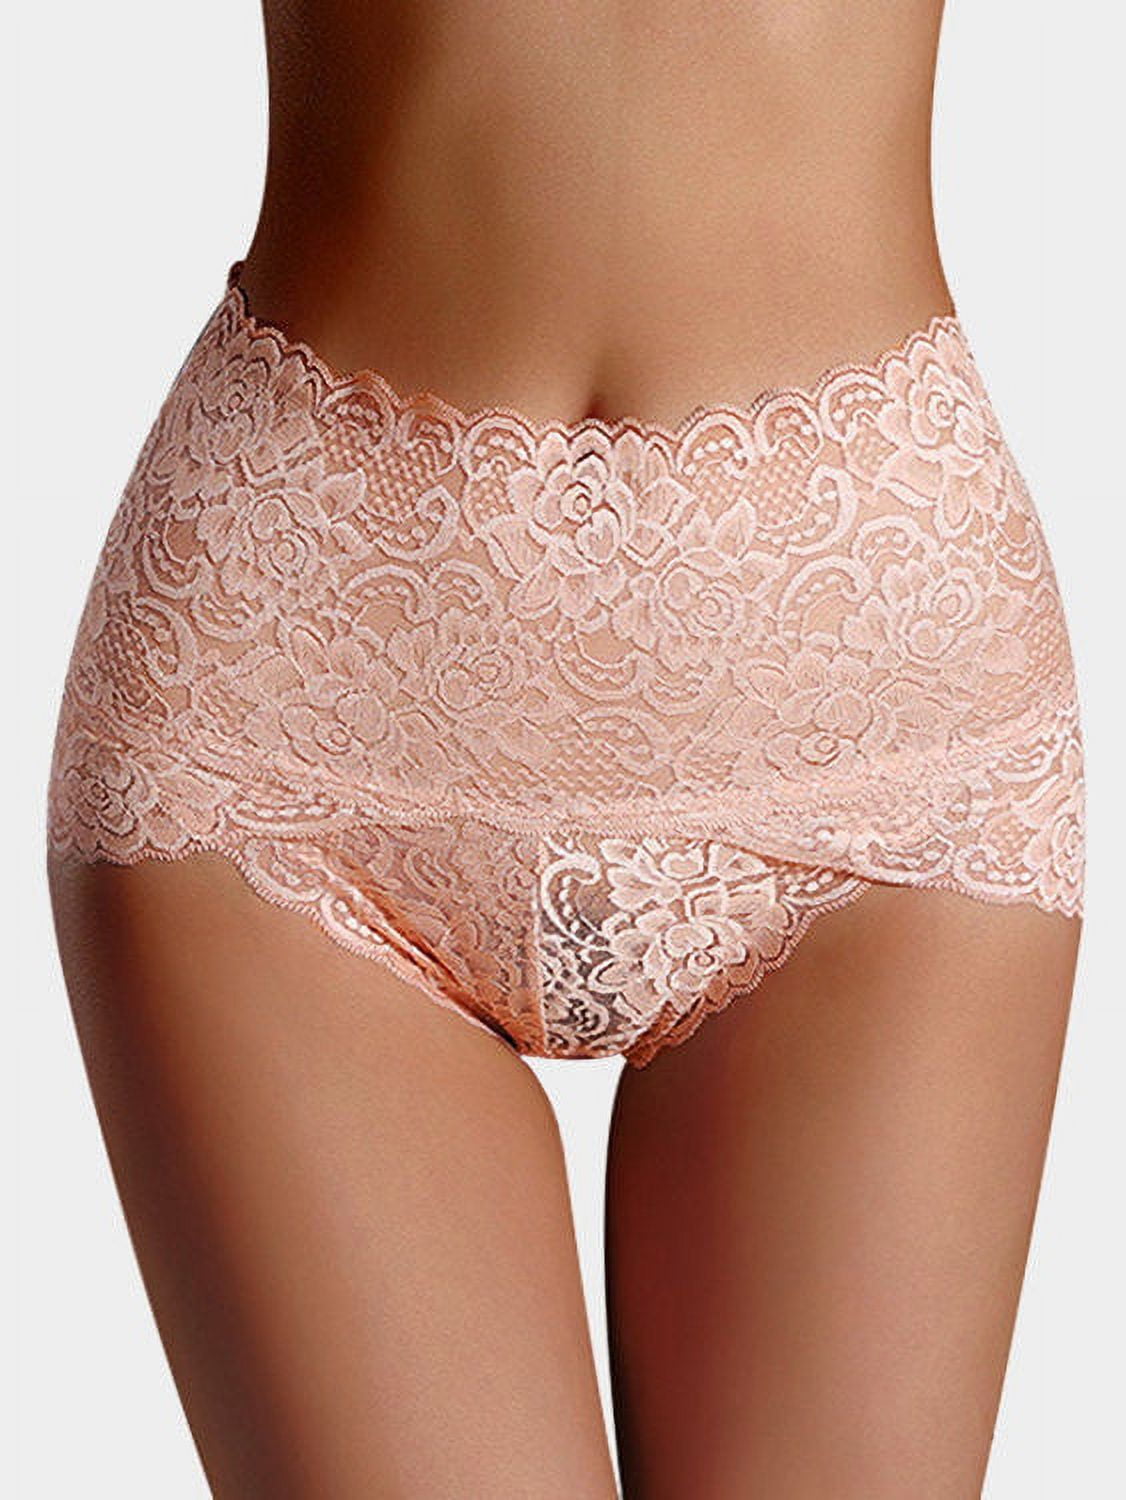 Women Sexy Lace Comfortable High Waist See Through Knickers